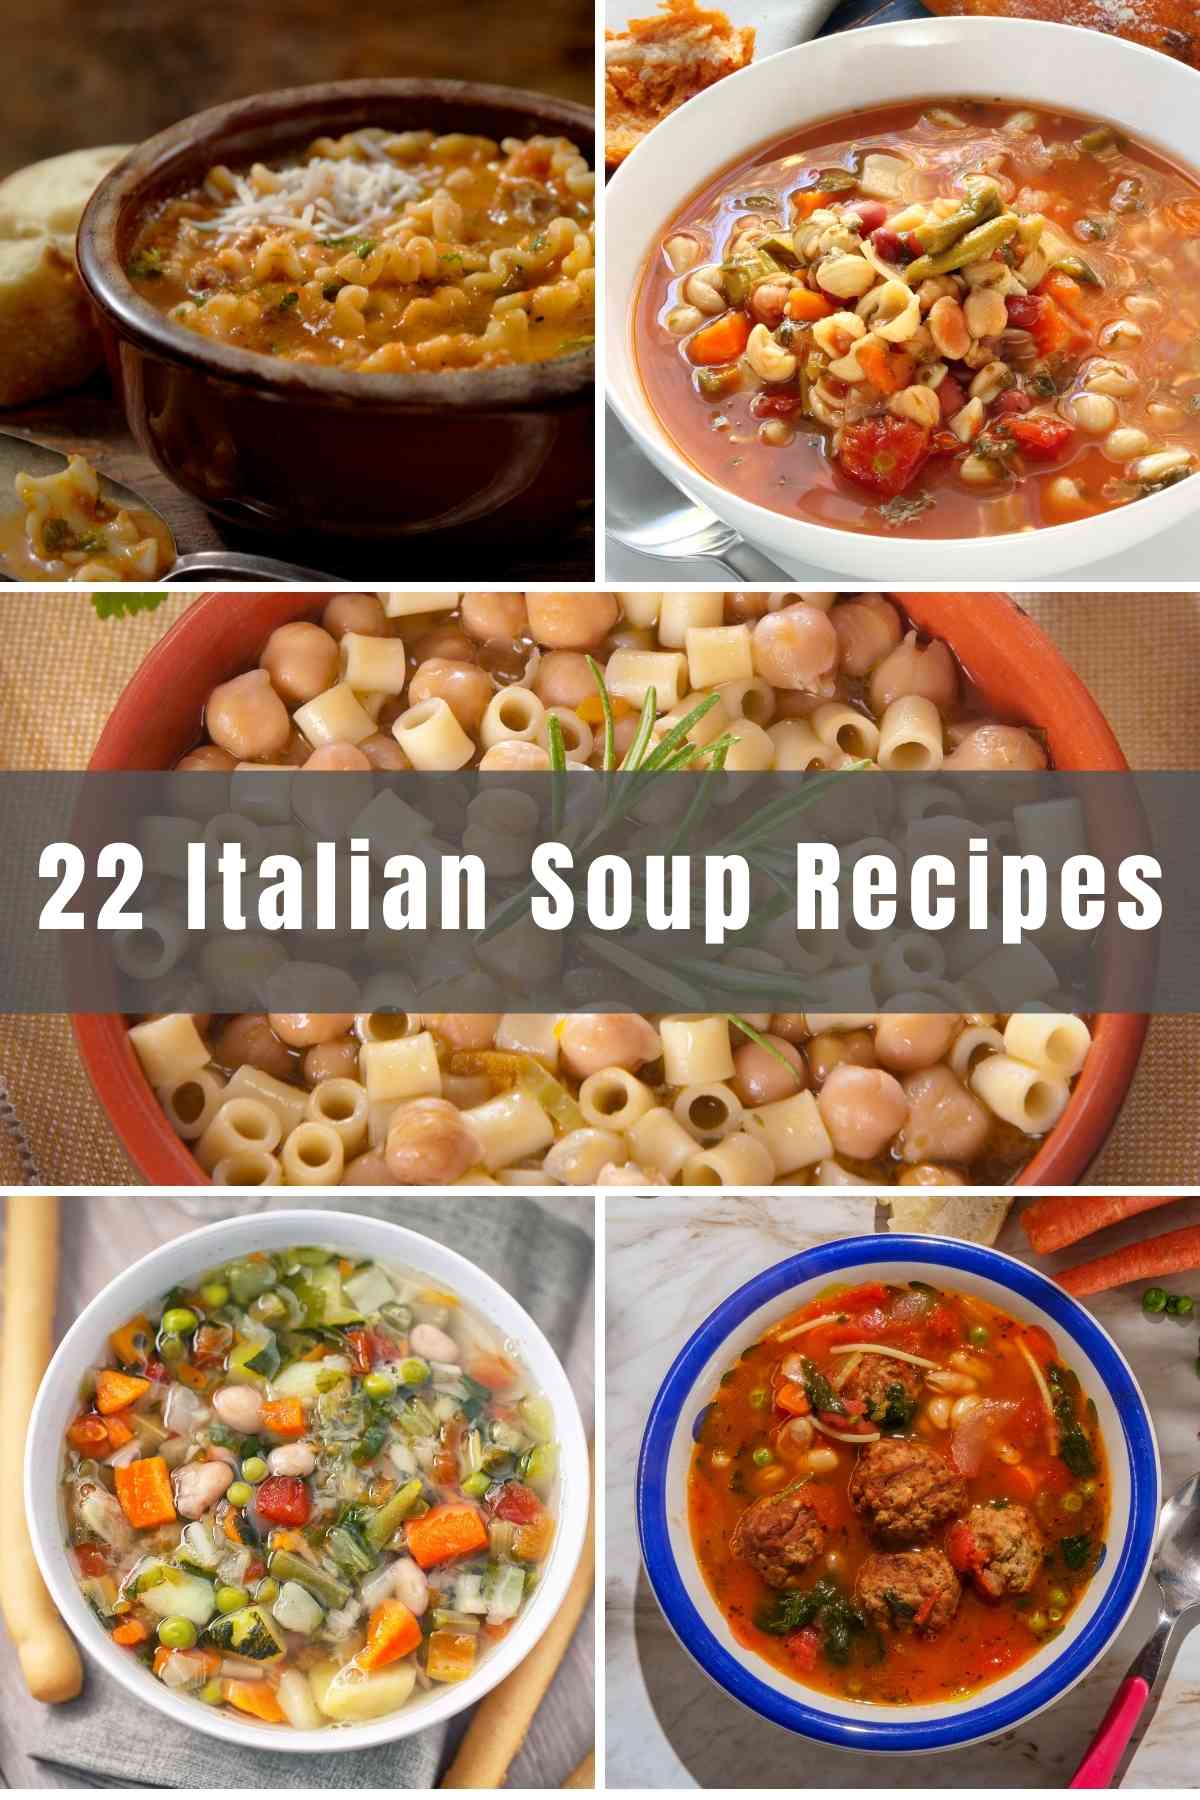 Italy has produced many incredible soup recipes using signature ingredients like pasta, sausage and fresh vegetables. We’ve gathered 22 of the Best Italian Soup Recipes for you to try! After reading this article, you won’t know which one to try first!